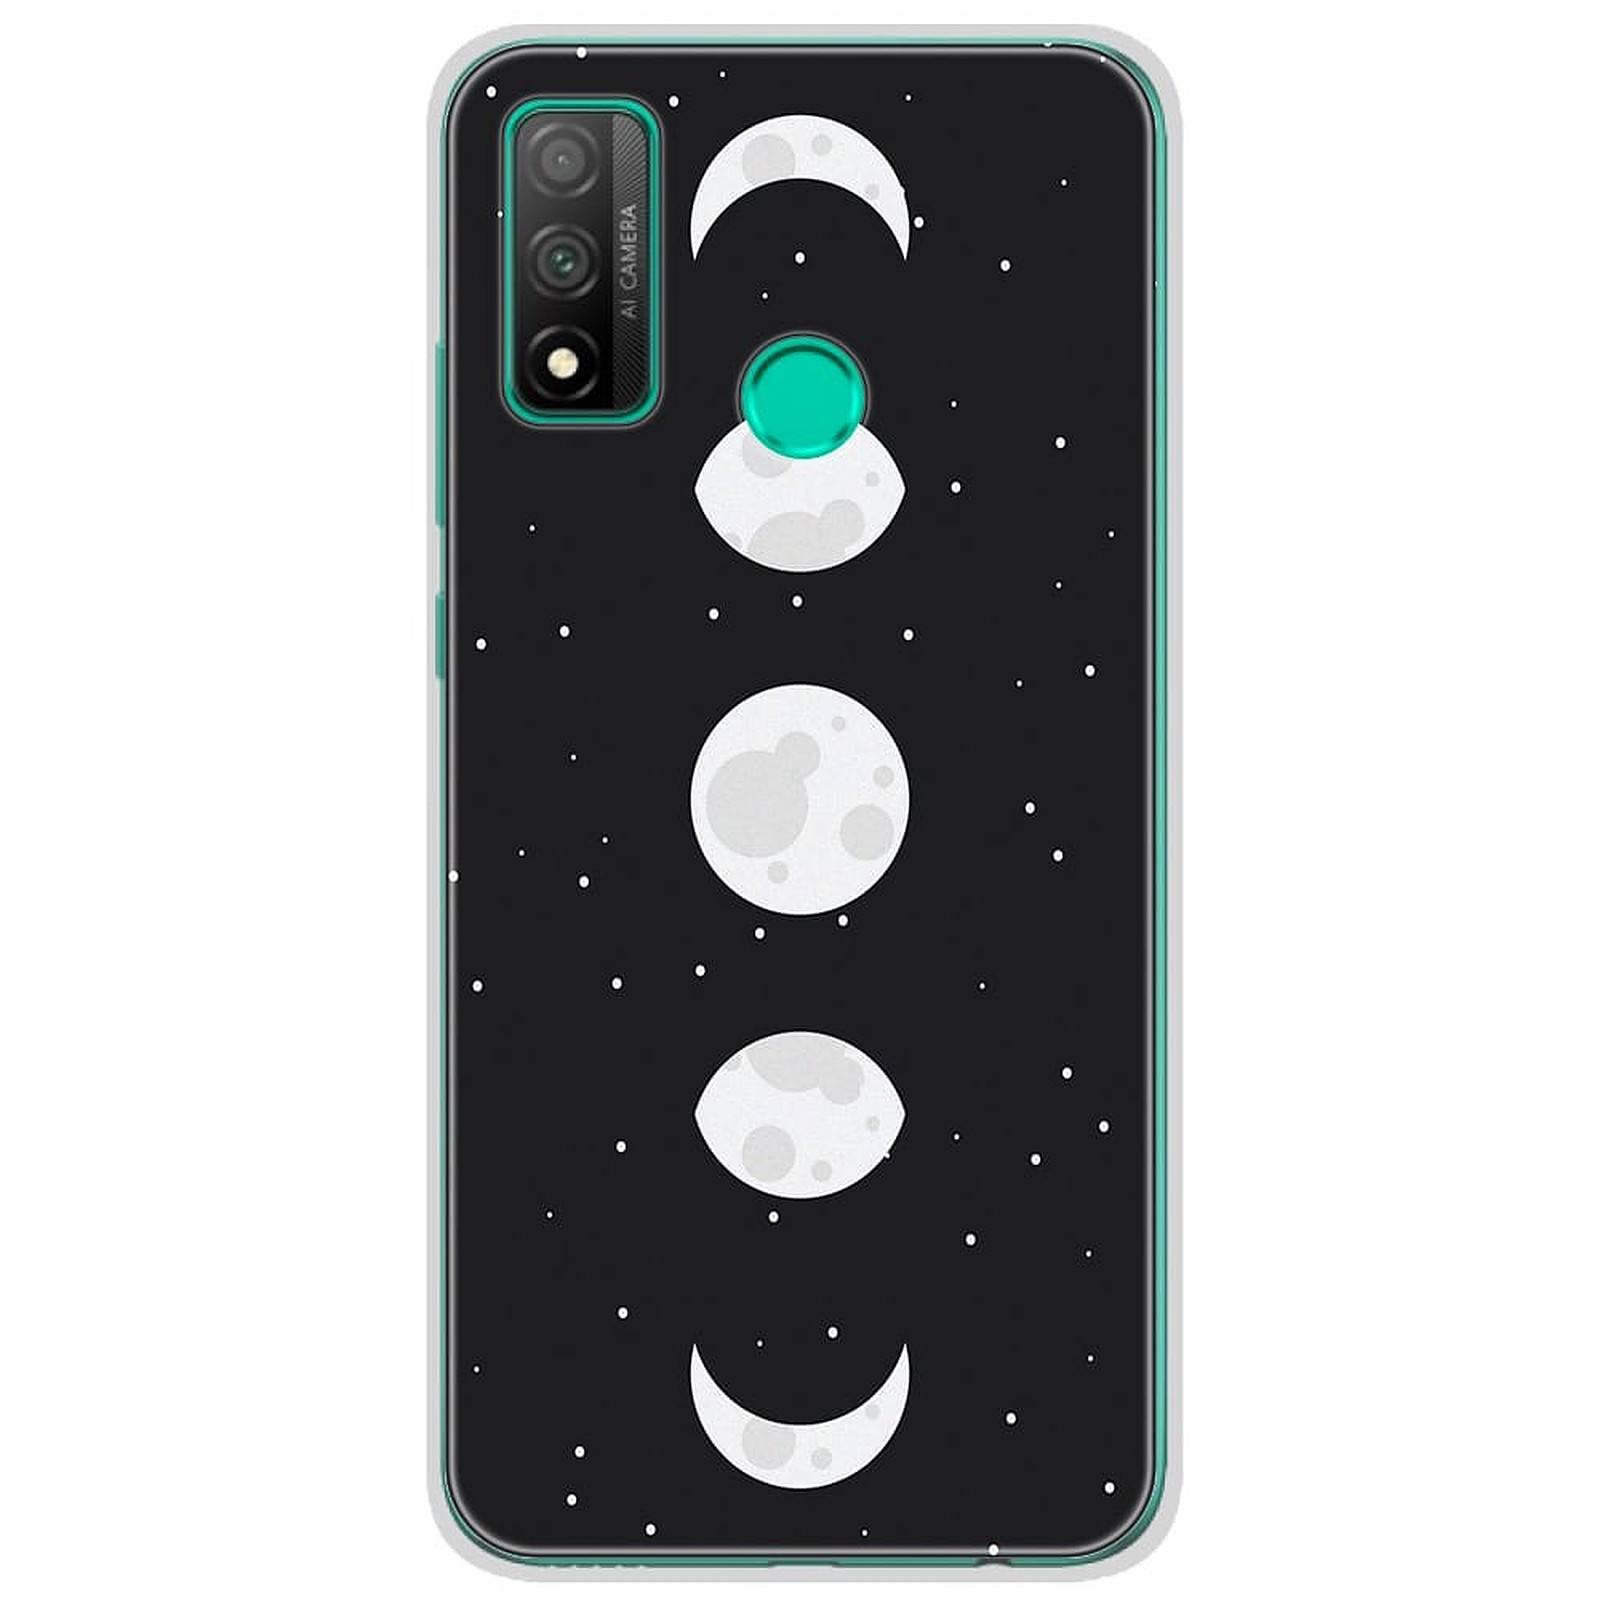 1001 Coques Coque silicone gel Huawei P Smart 2020 motif Phase de Lune - Coque telephone 1001Coques